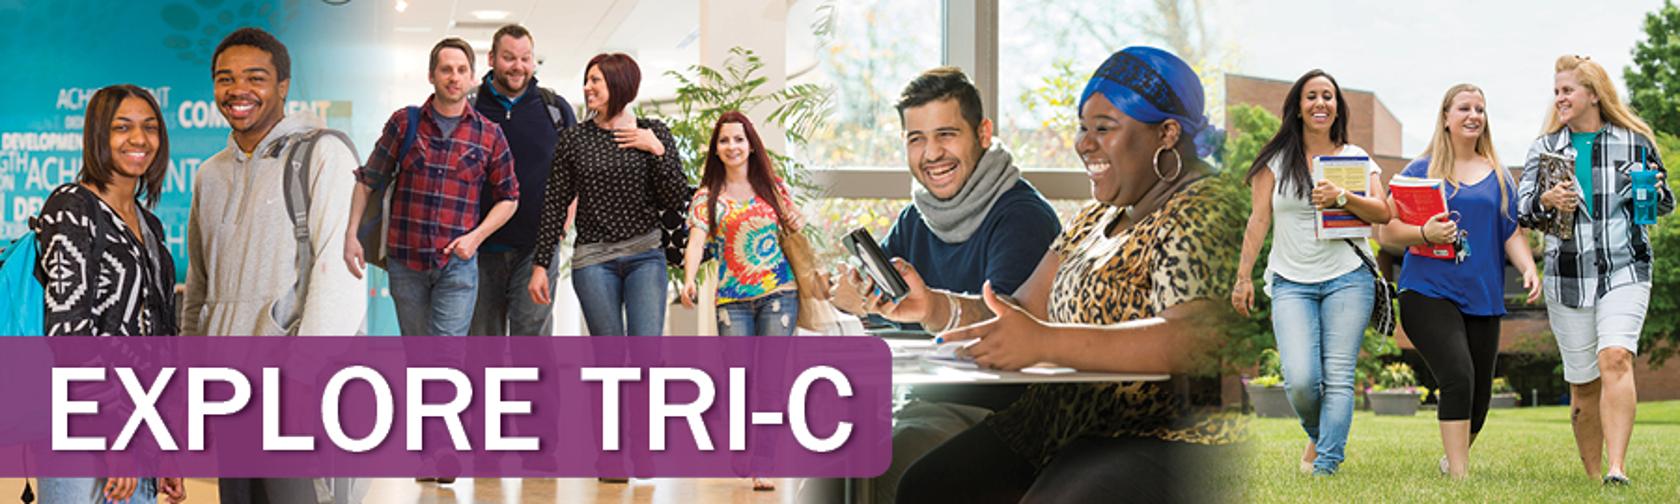 TriC Visit the Campuses and Learn More Cleveland, Ohio